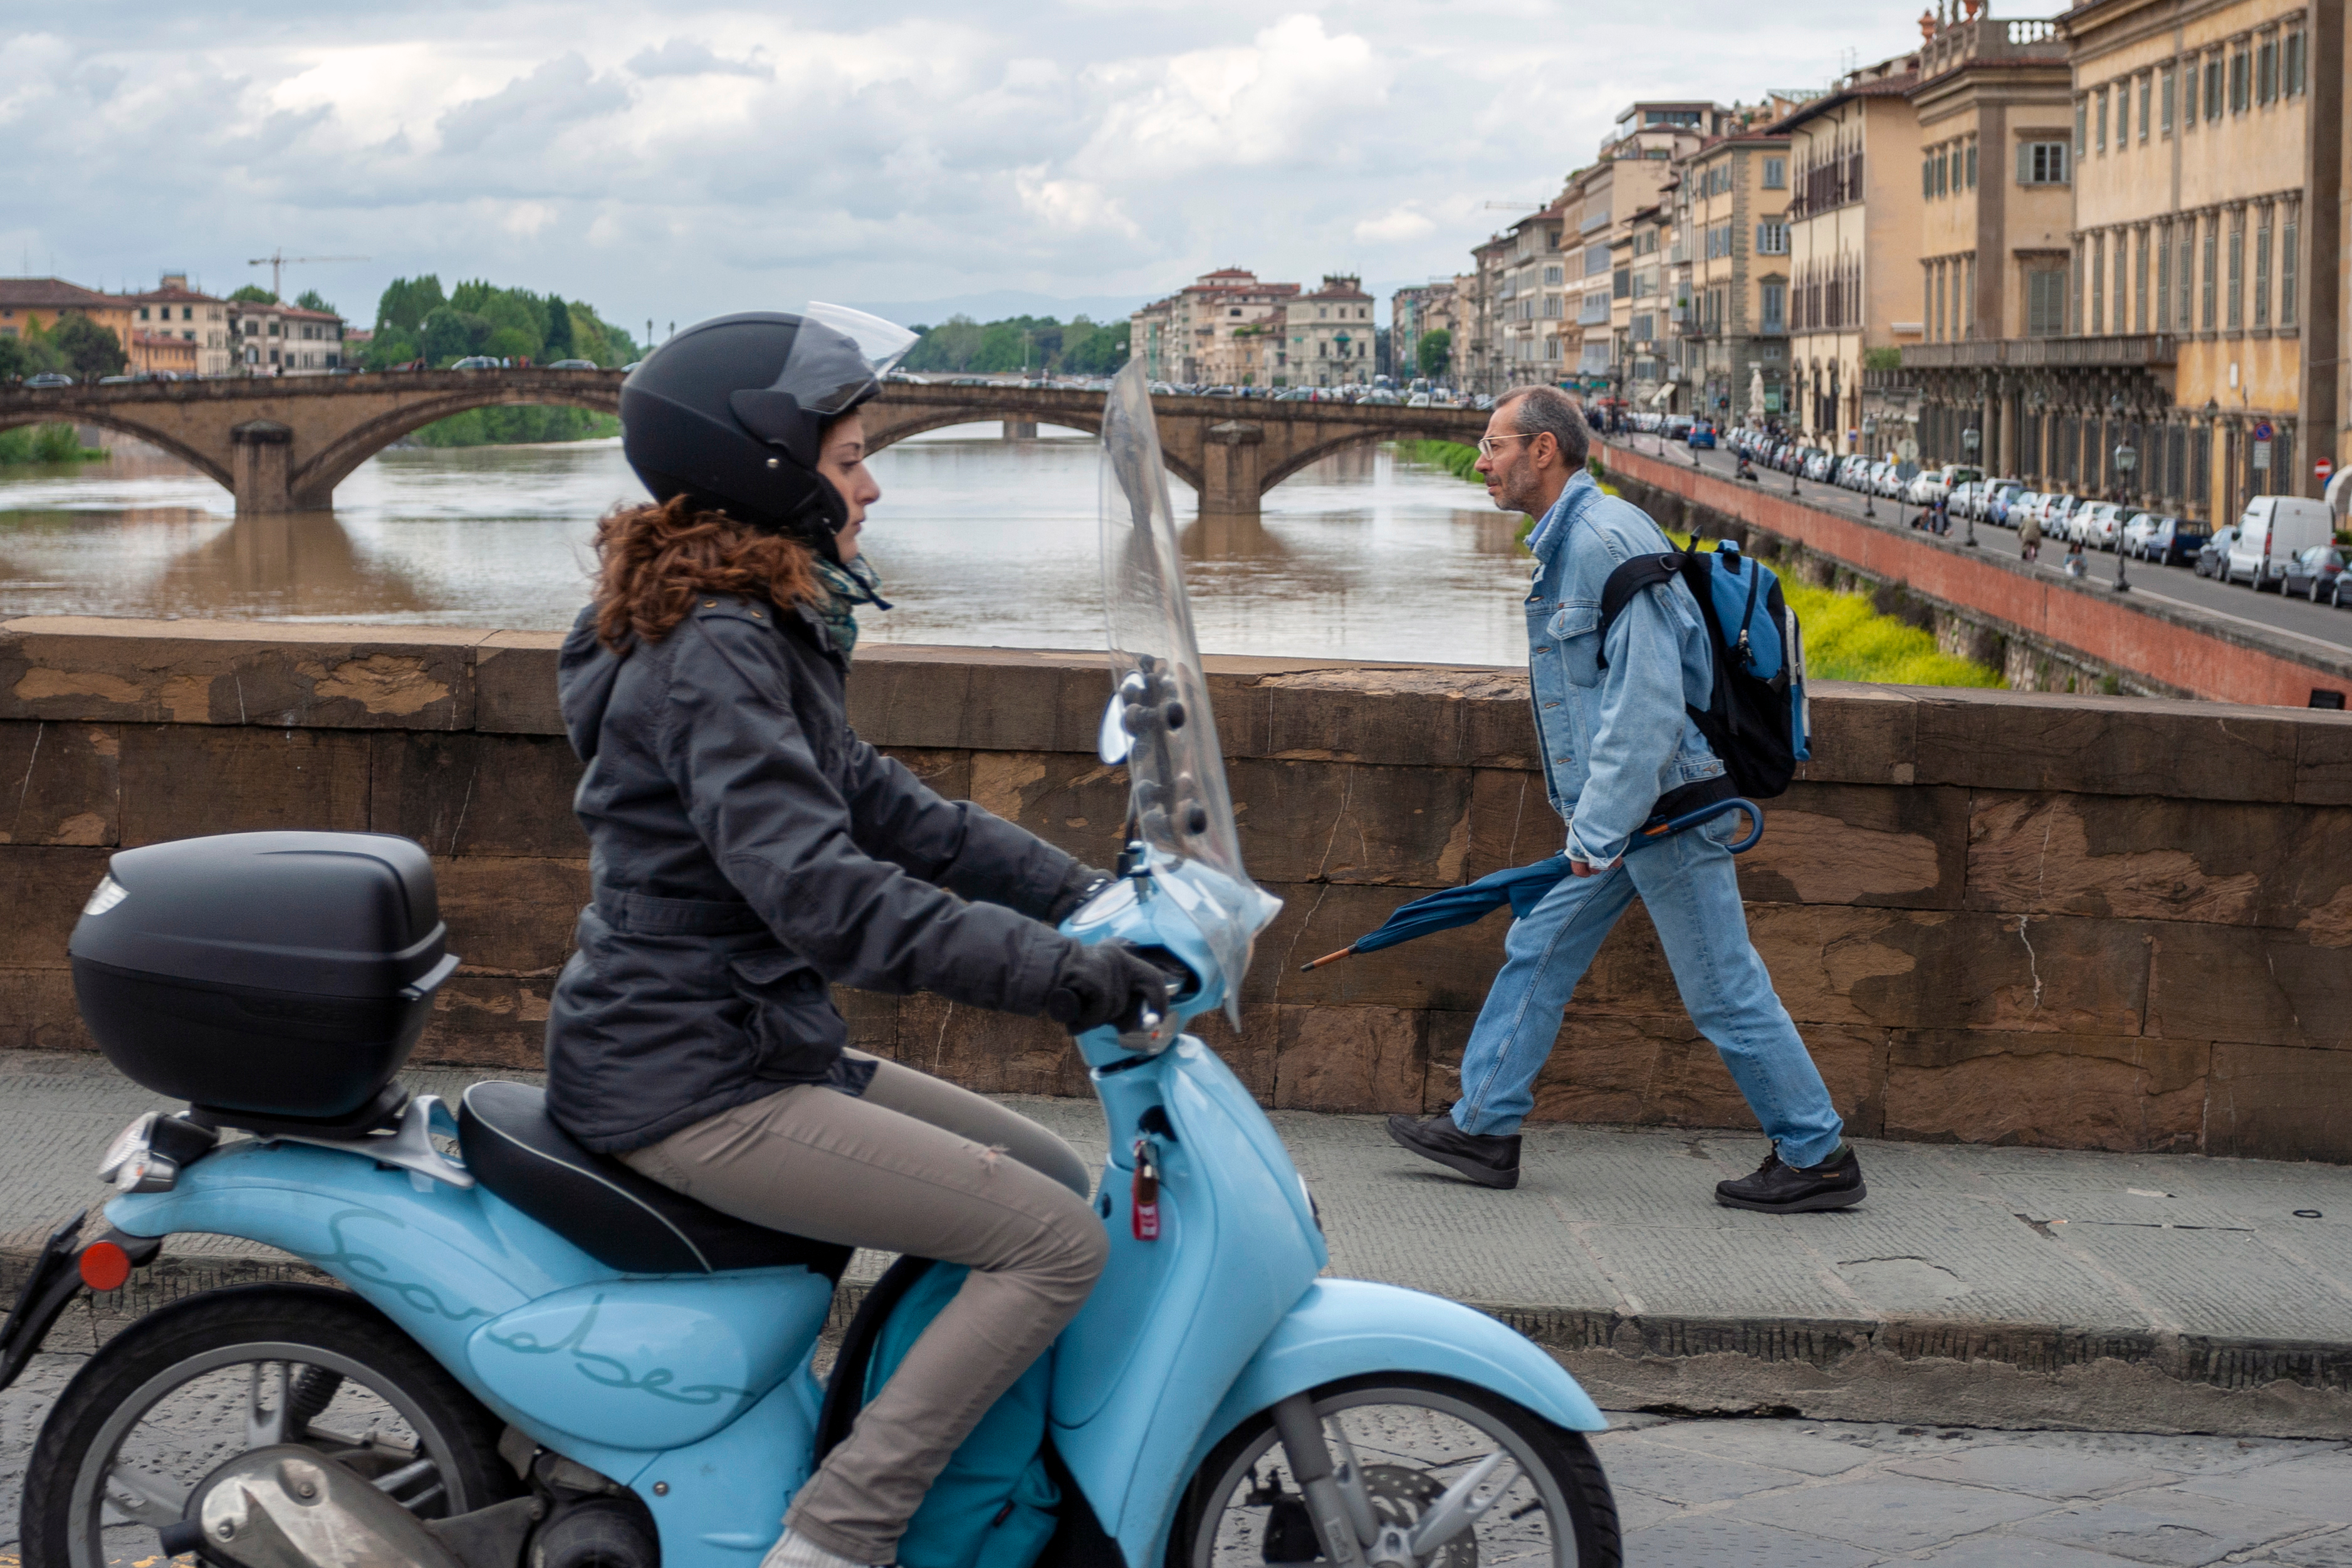 A women riding a vespa on a summer day in the streets of Florence.